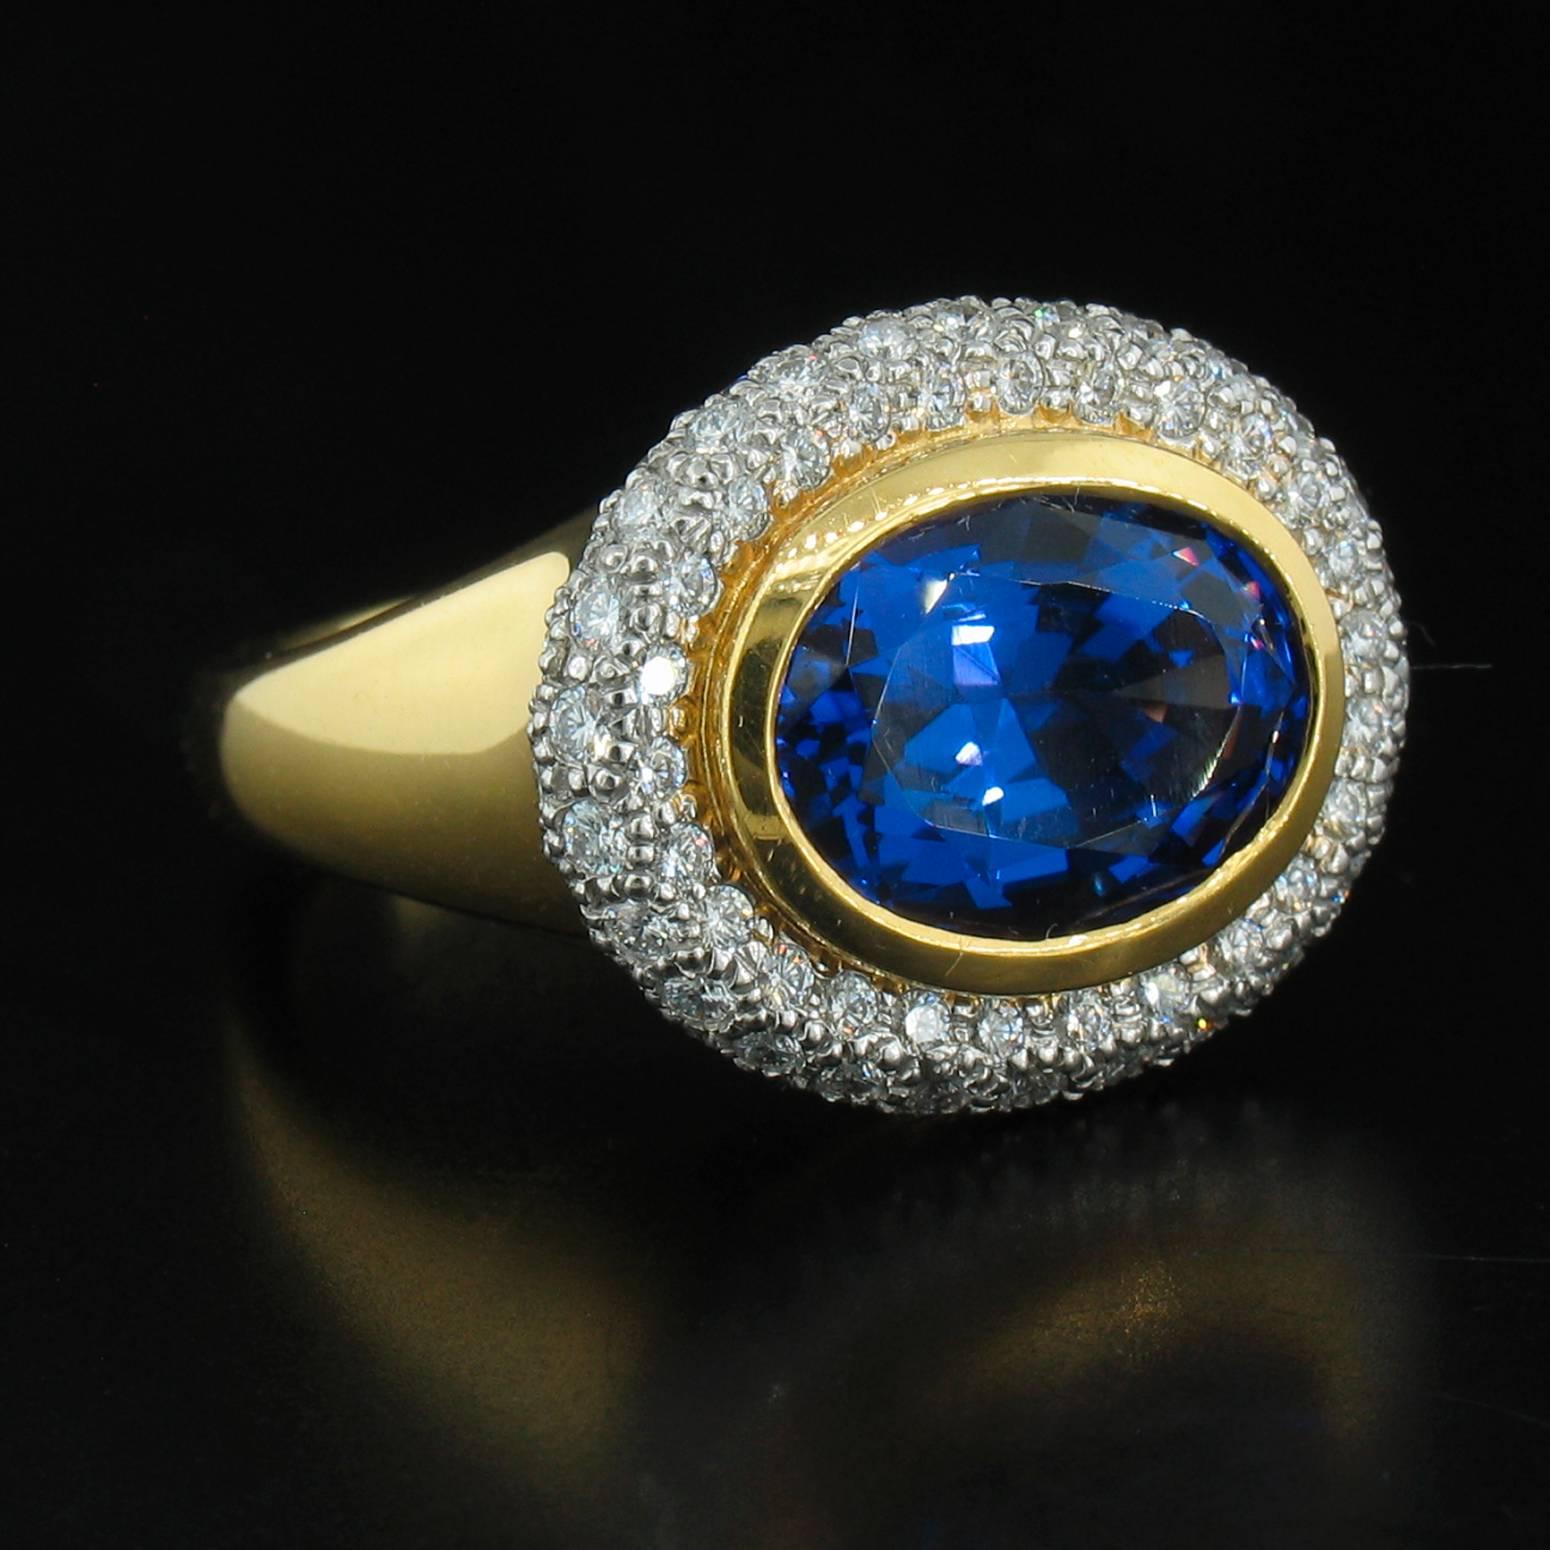 The Krementz family created some of the best quality fine jewelry in America from the 1860's until Richard's passing in 2012.  For many generations, the Krementz name was synonymous with high quality, hand made, custom settings and gems held to the